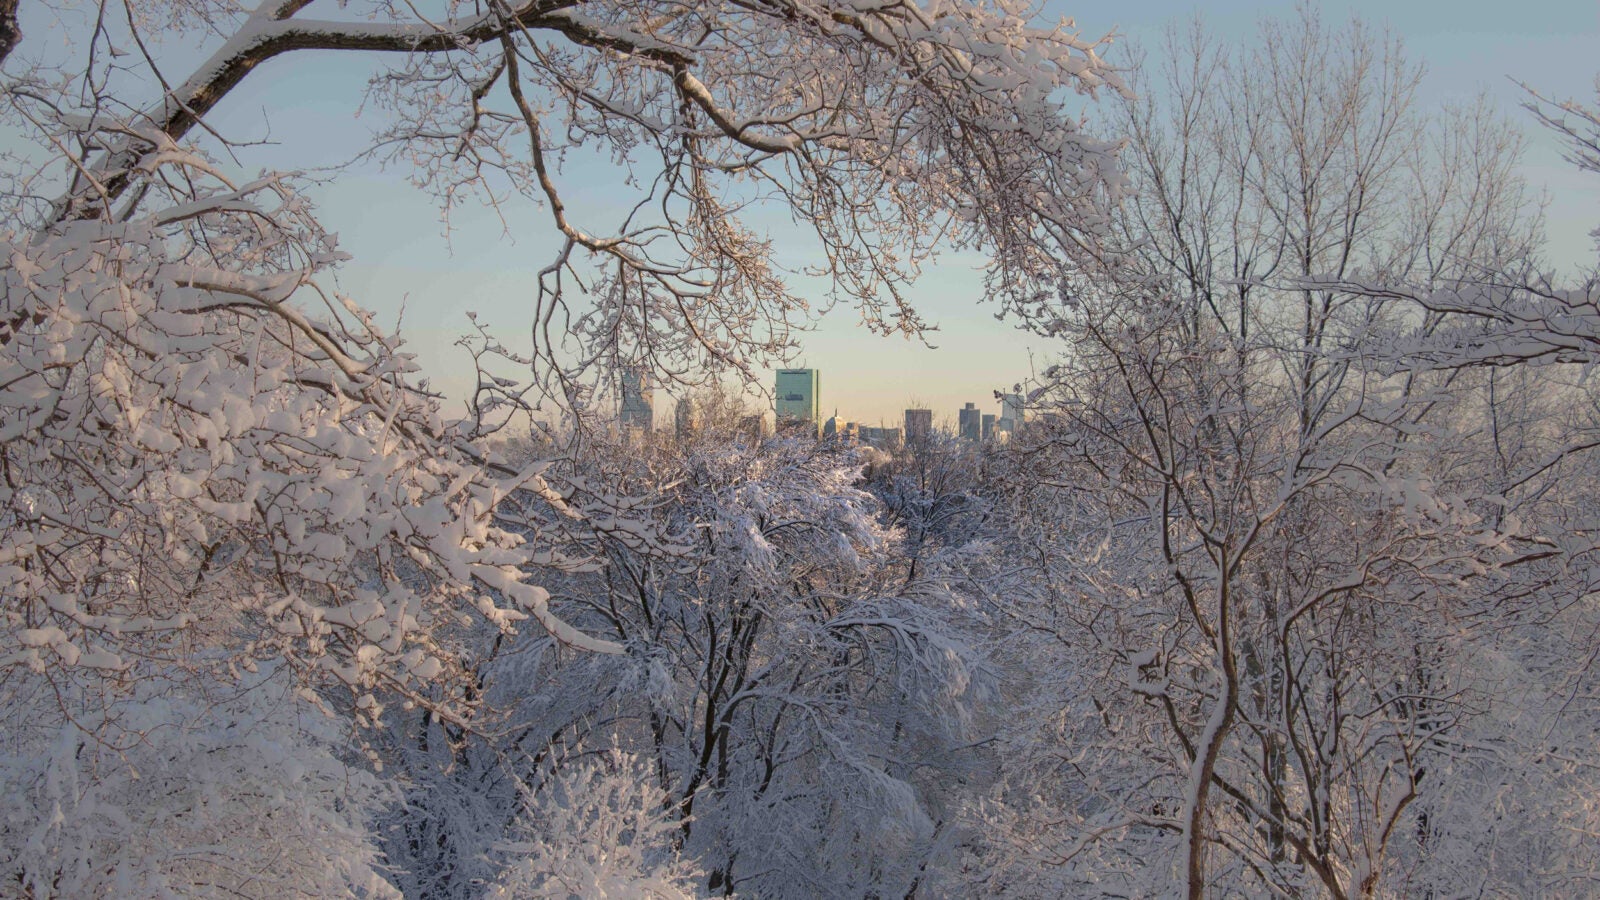 View of Boston skyline from snowy Arnold Arboretum.